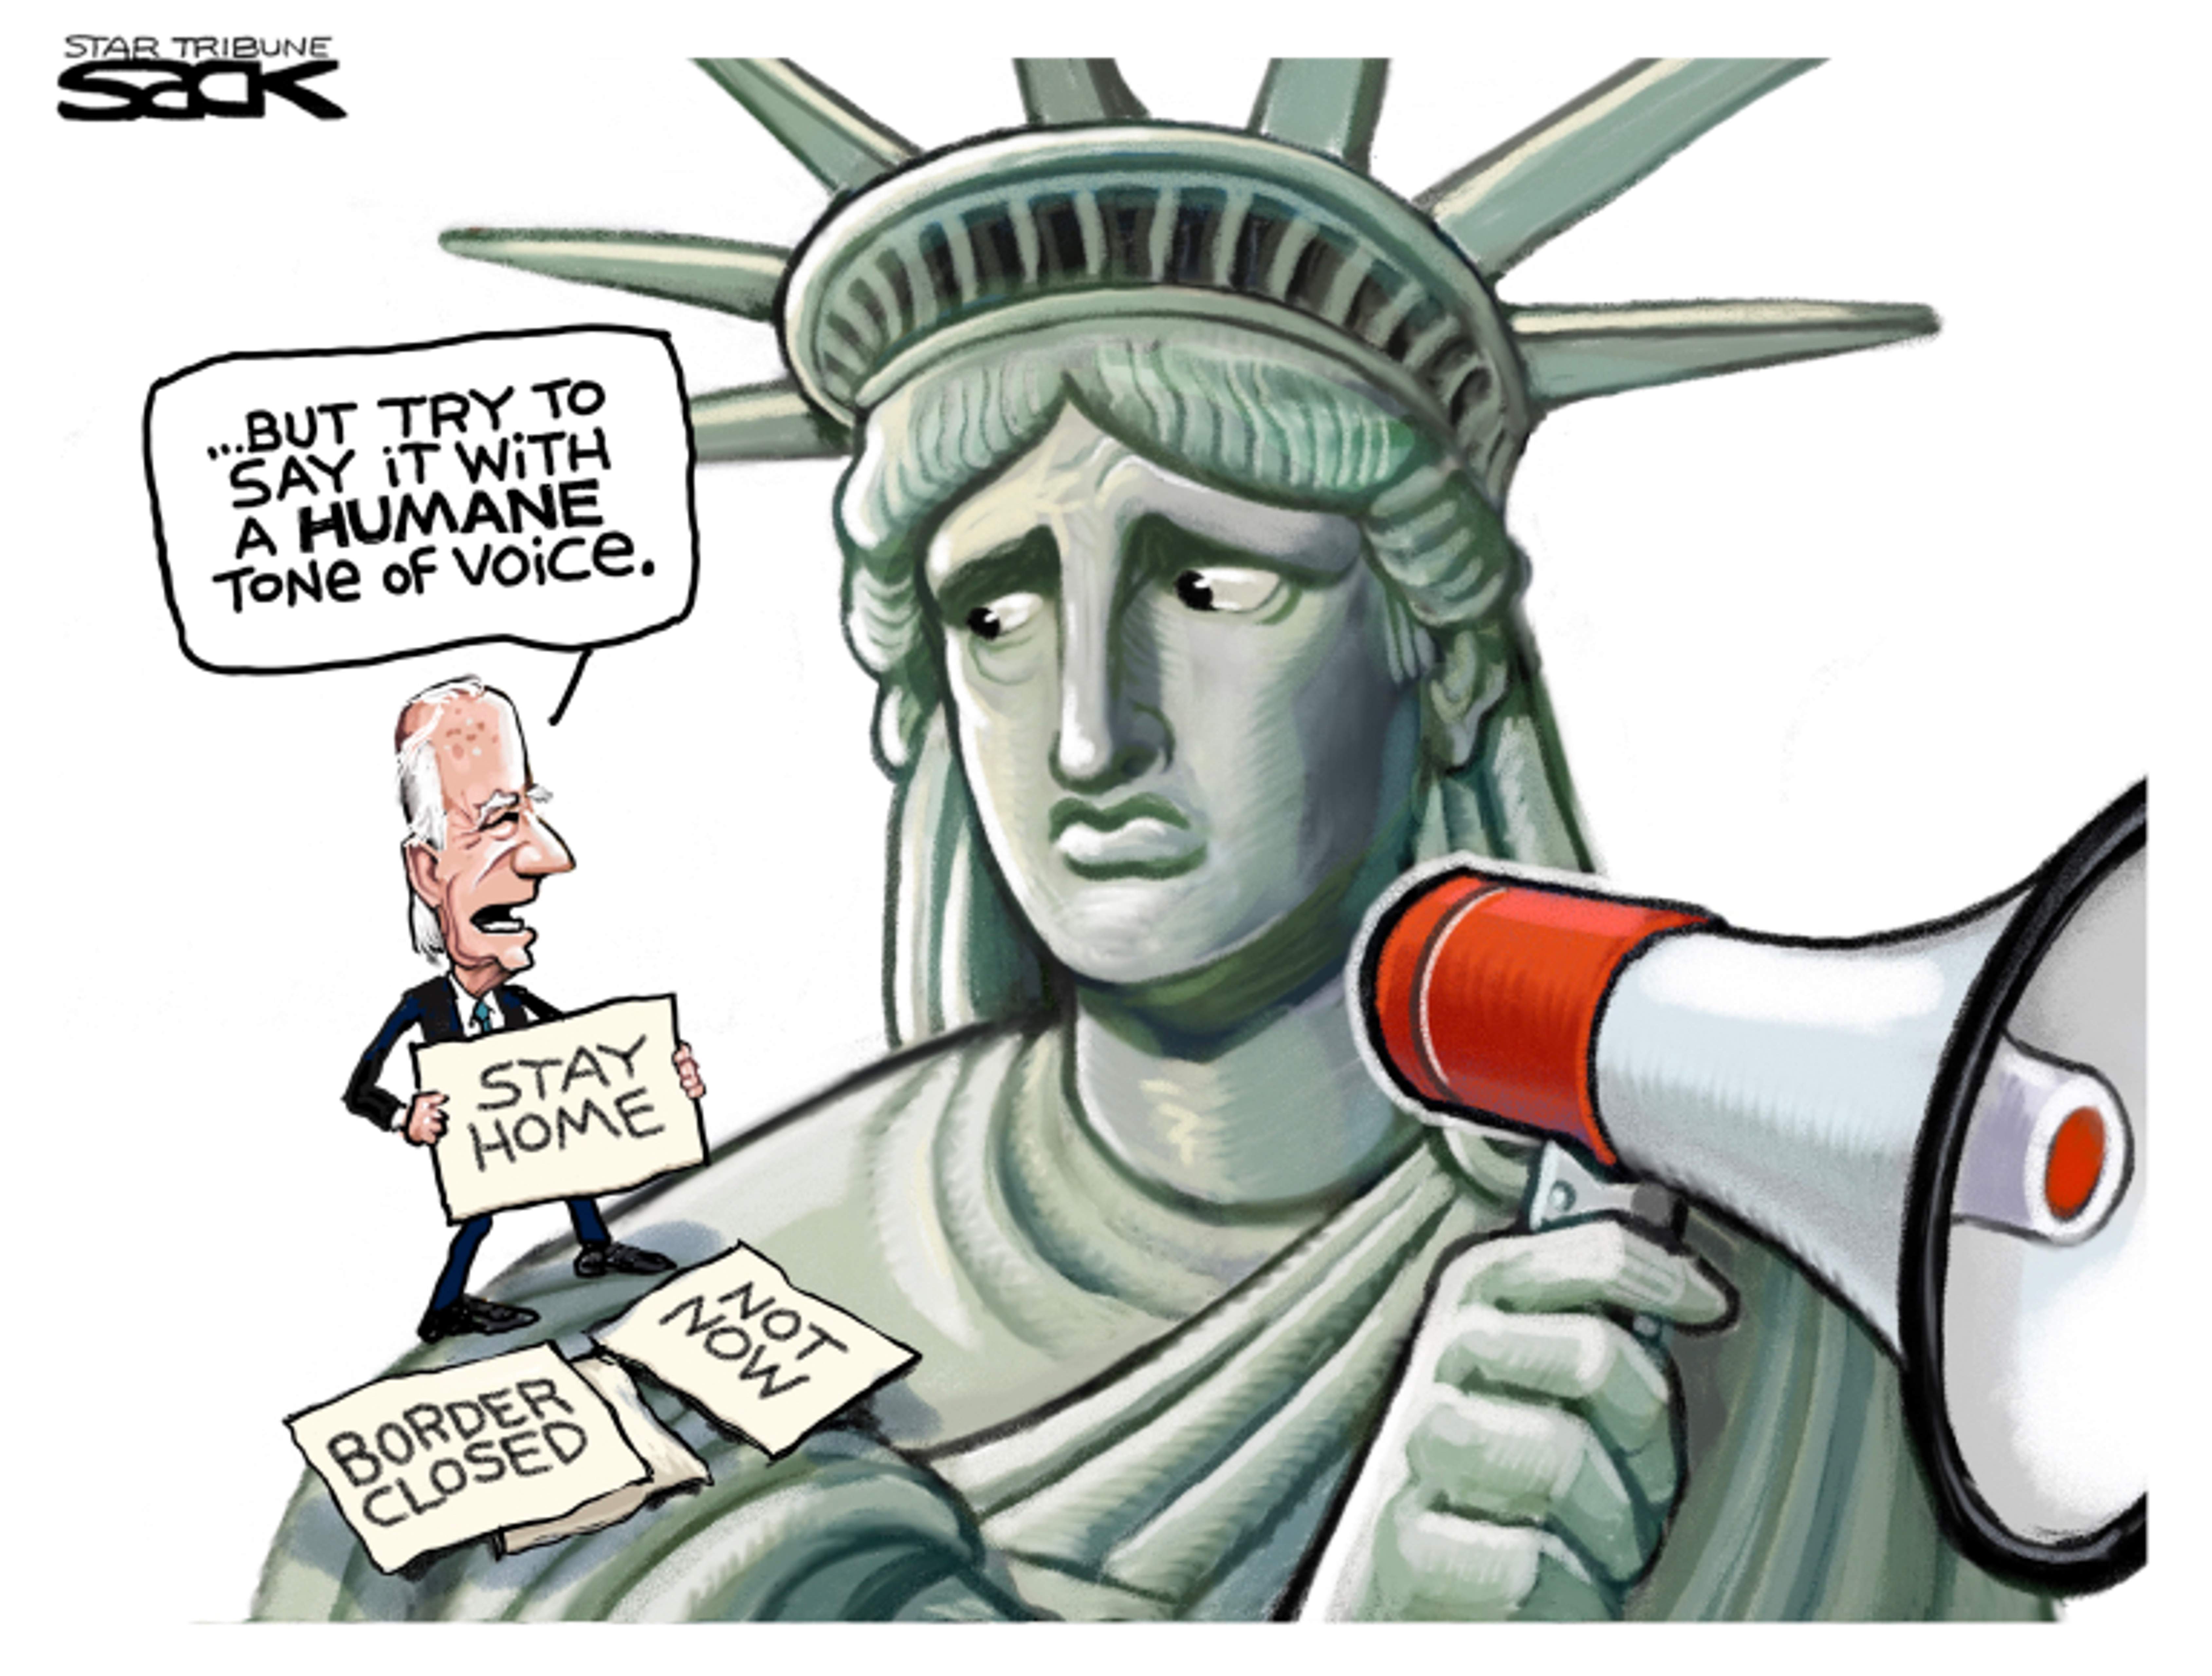 Political cartoon of the statue of liberty with a bullhorn, with Biden showing her cue cards that read, "stay home", "border closed", and "not now."